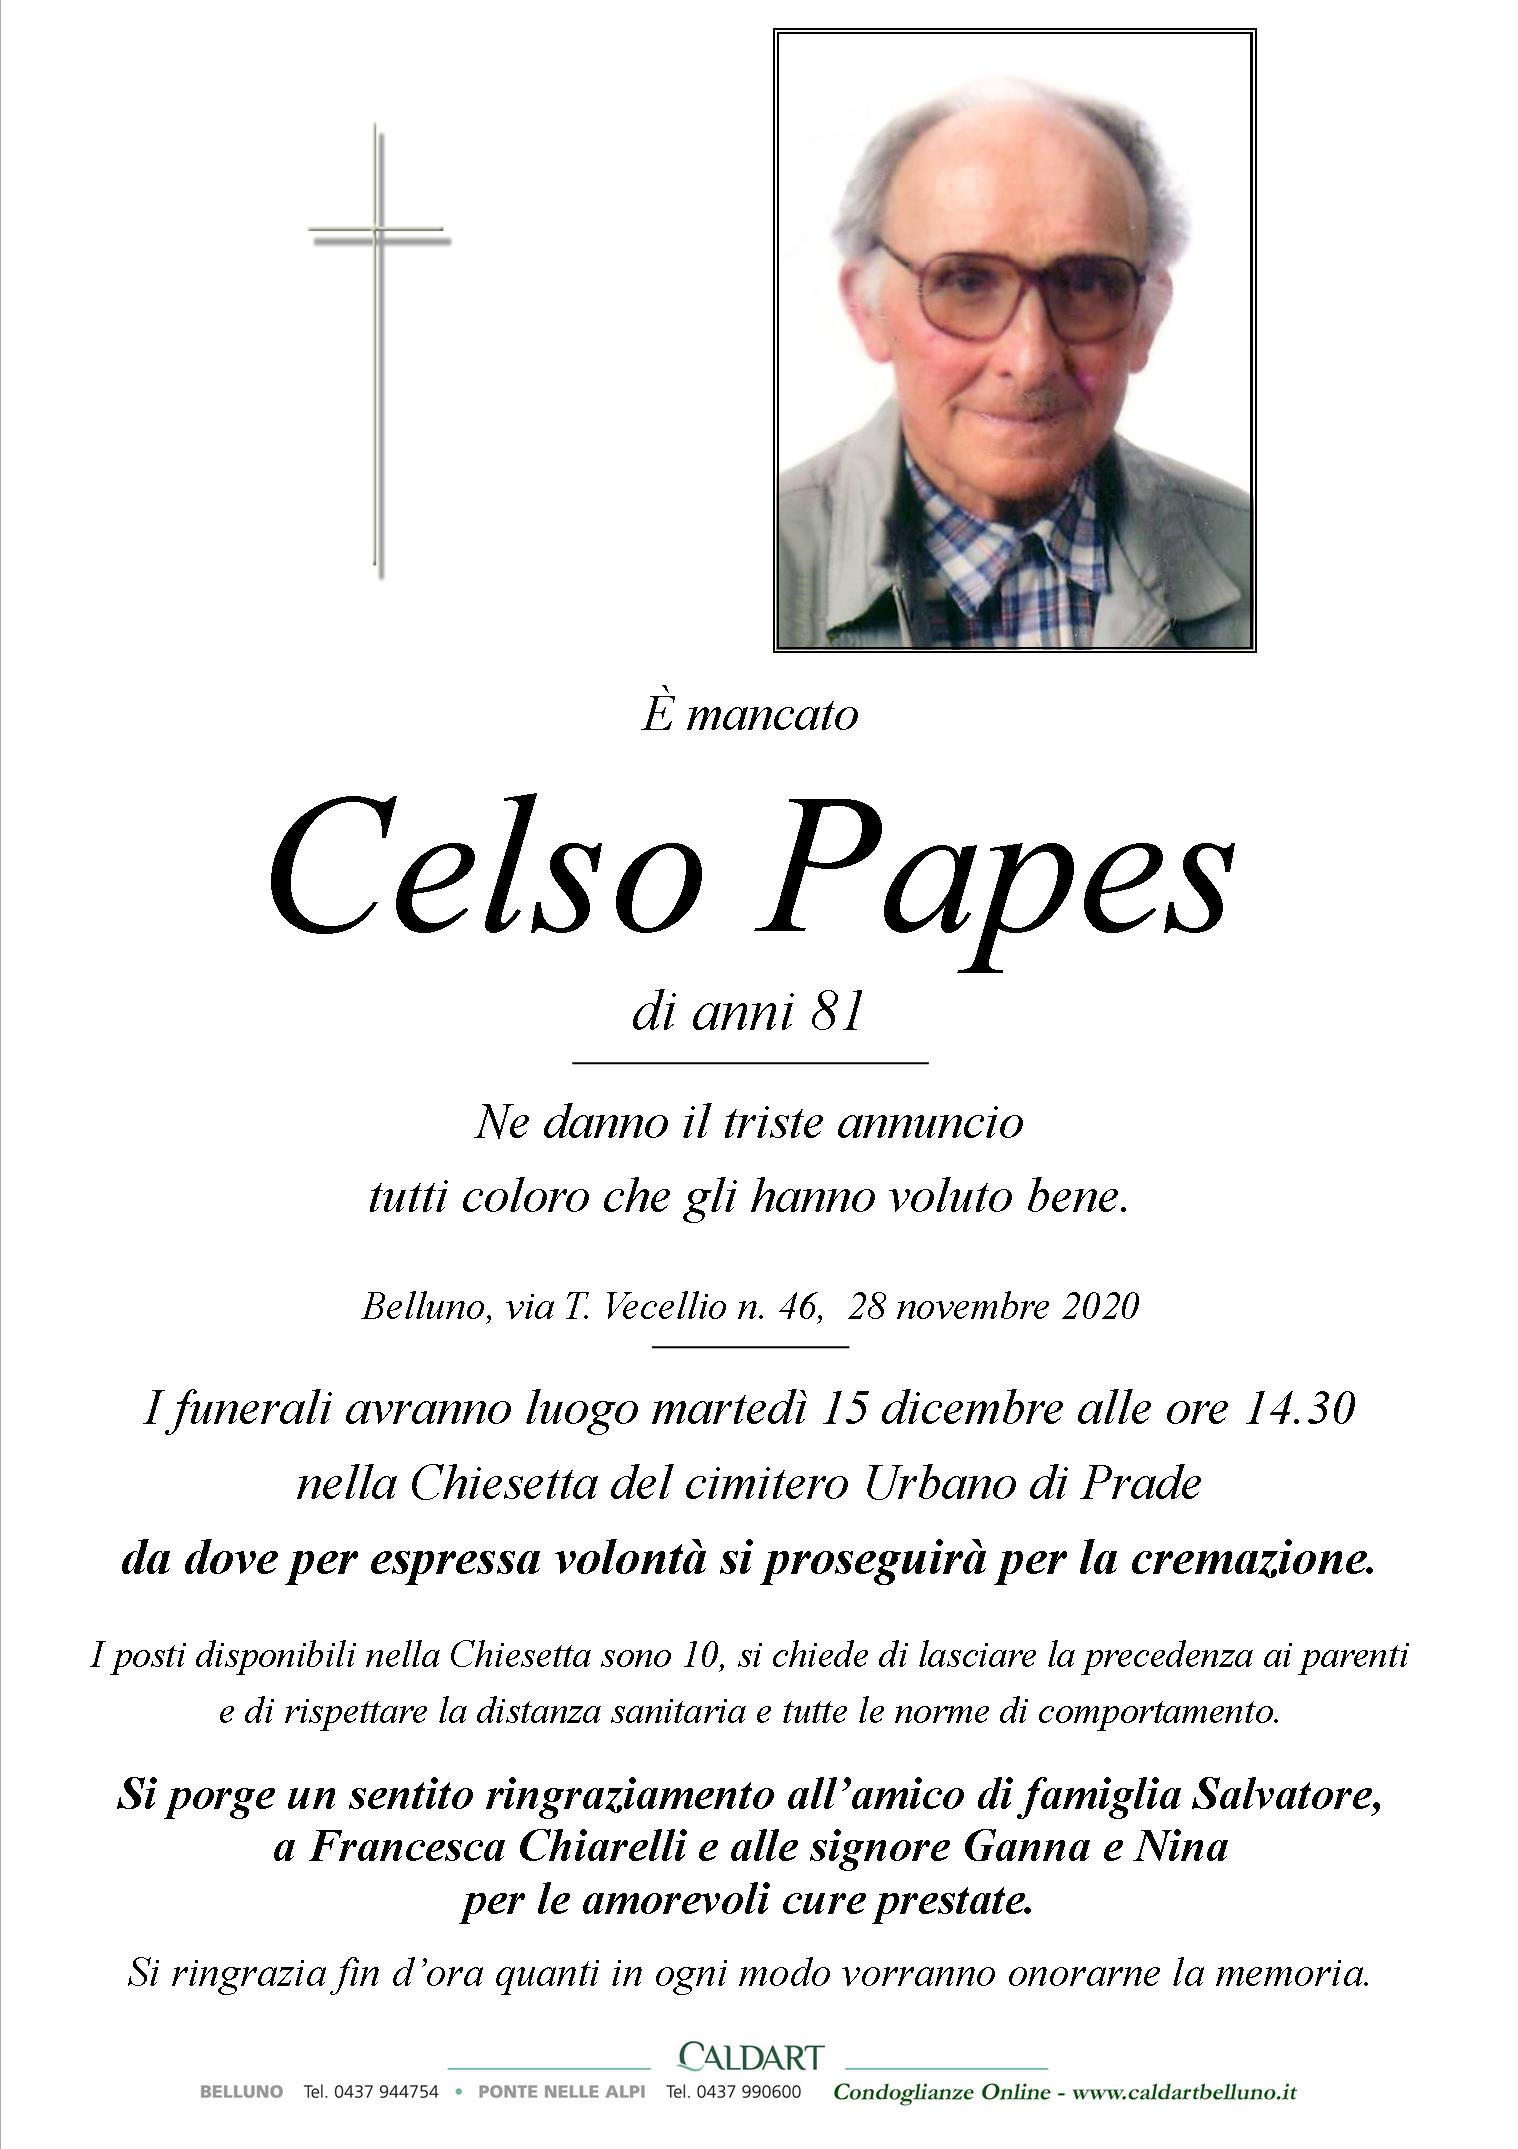 Papes Celso